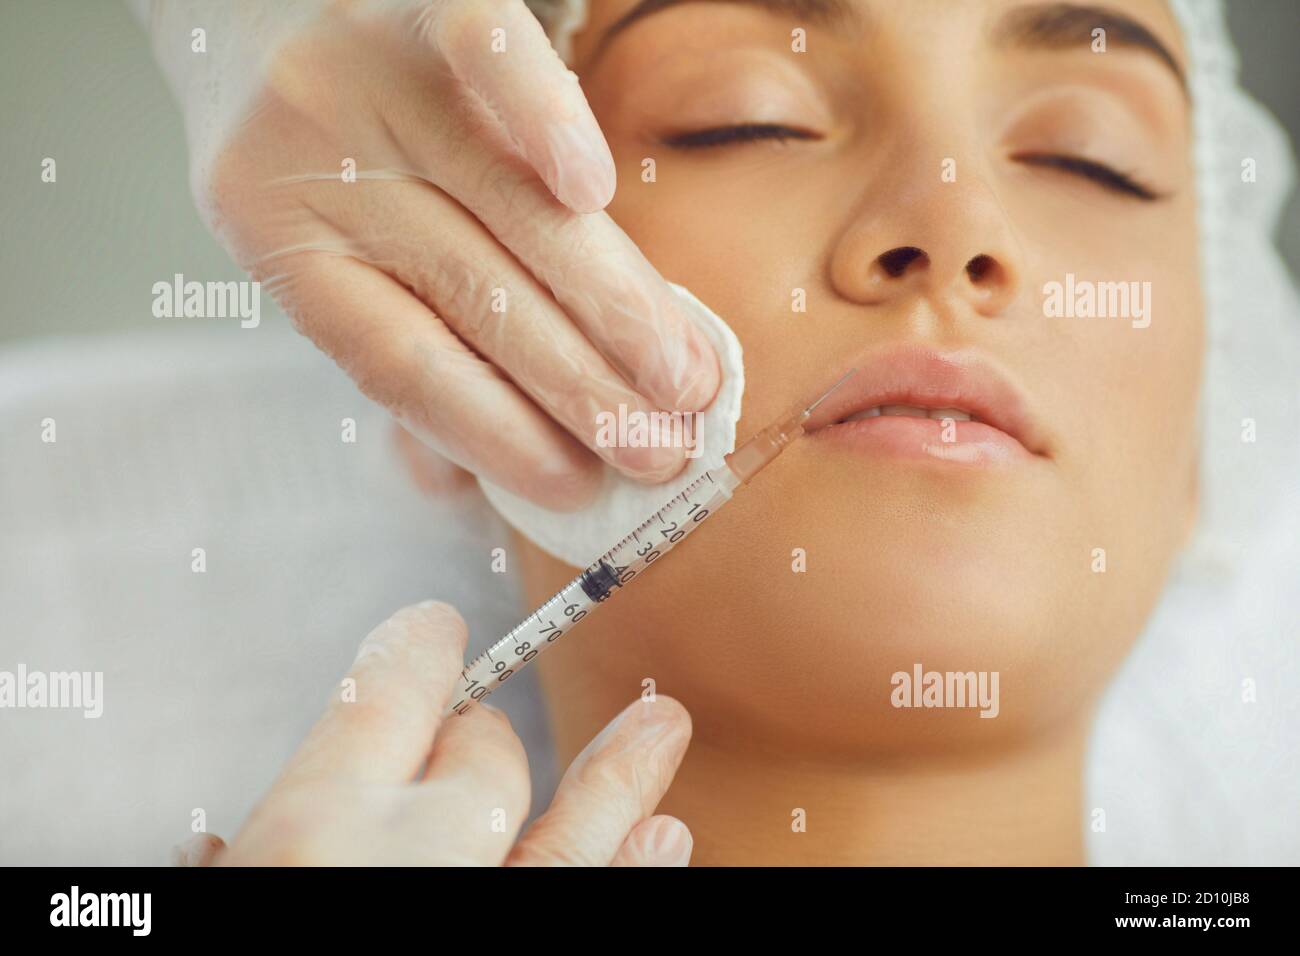 Therapists hands injecting filler botox for correction upper lip of young woman Stock Photo